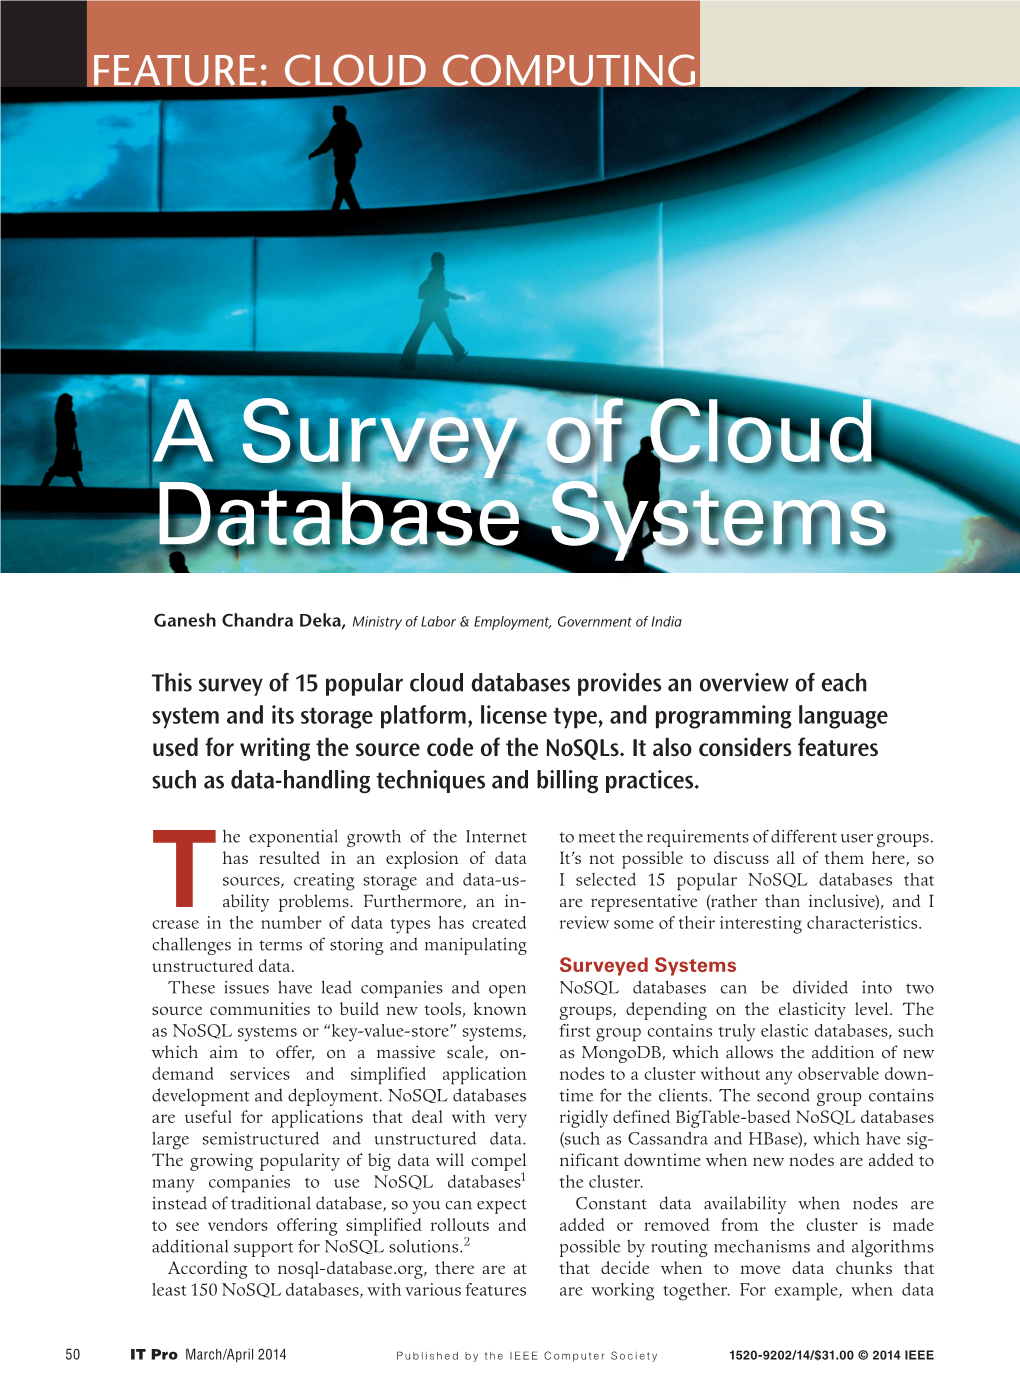 A Survey of Cloud Database Systems